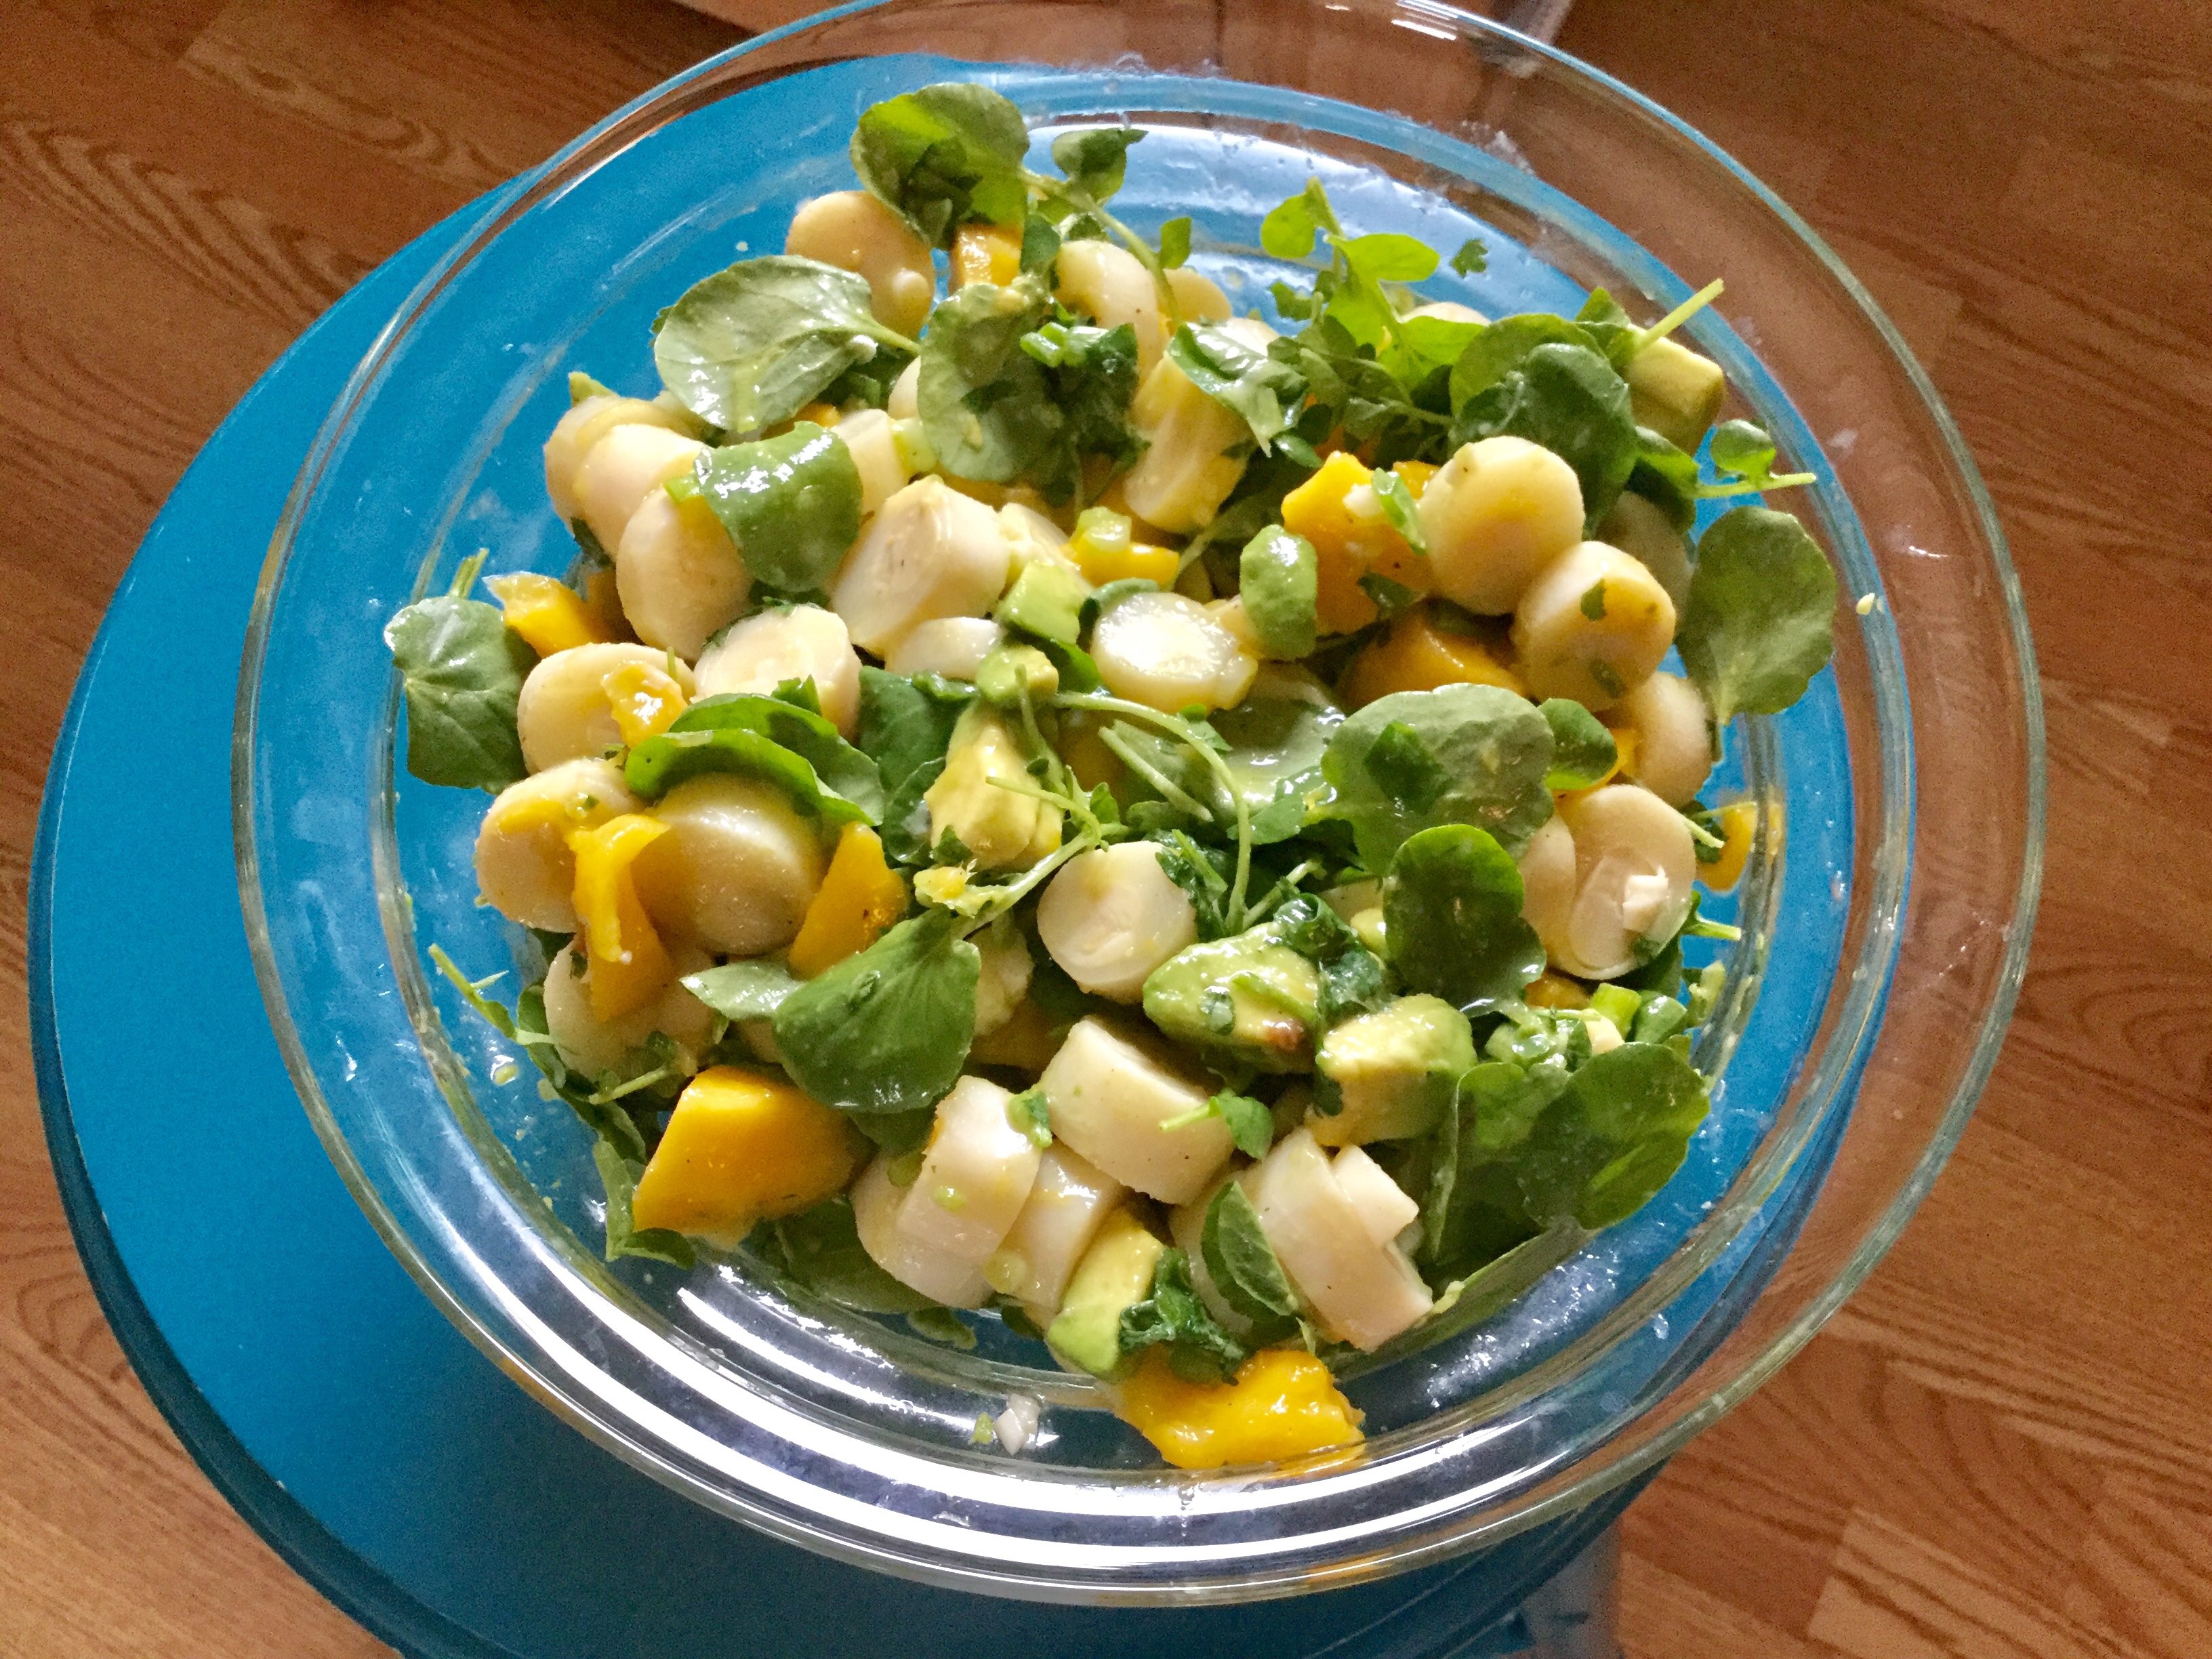 Tropical Hearts of Palm Salad with Mango and Avocado